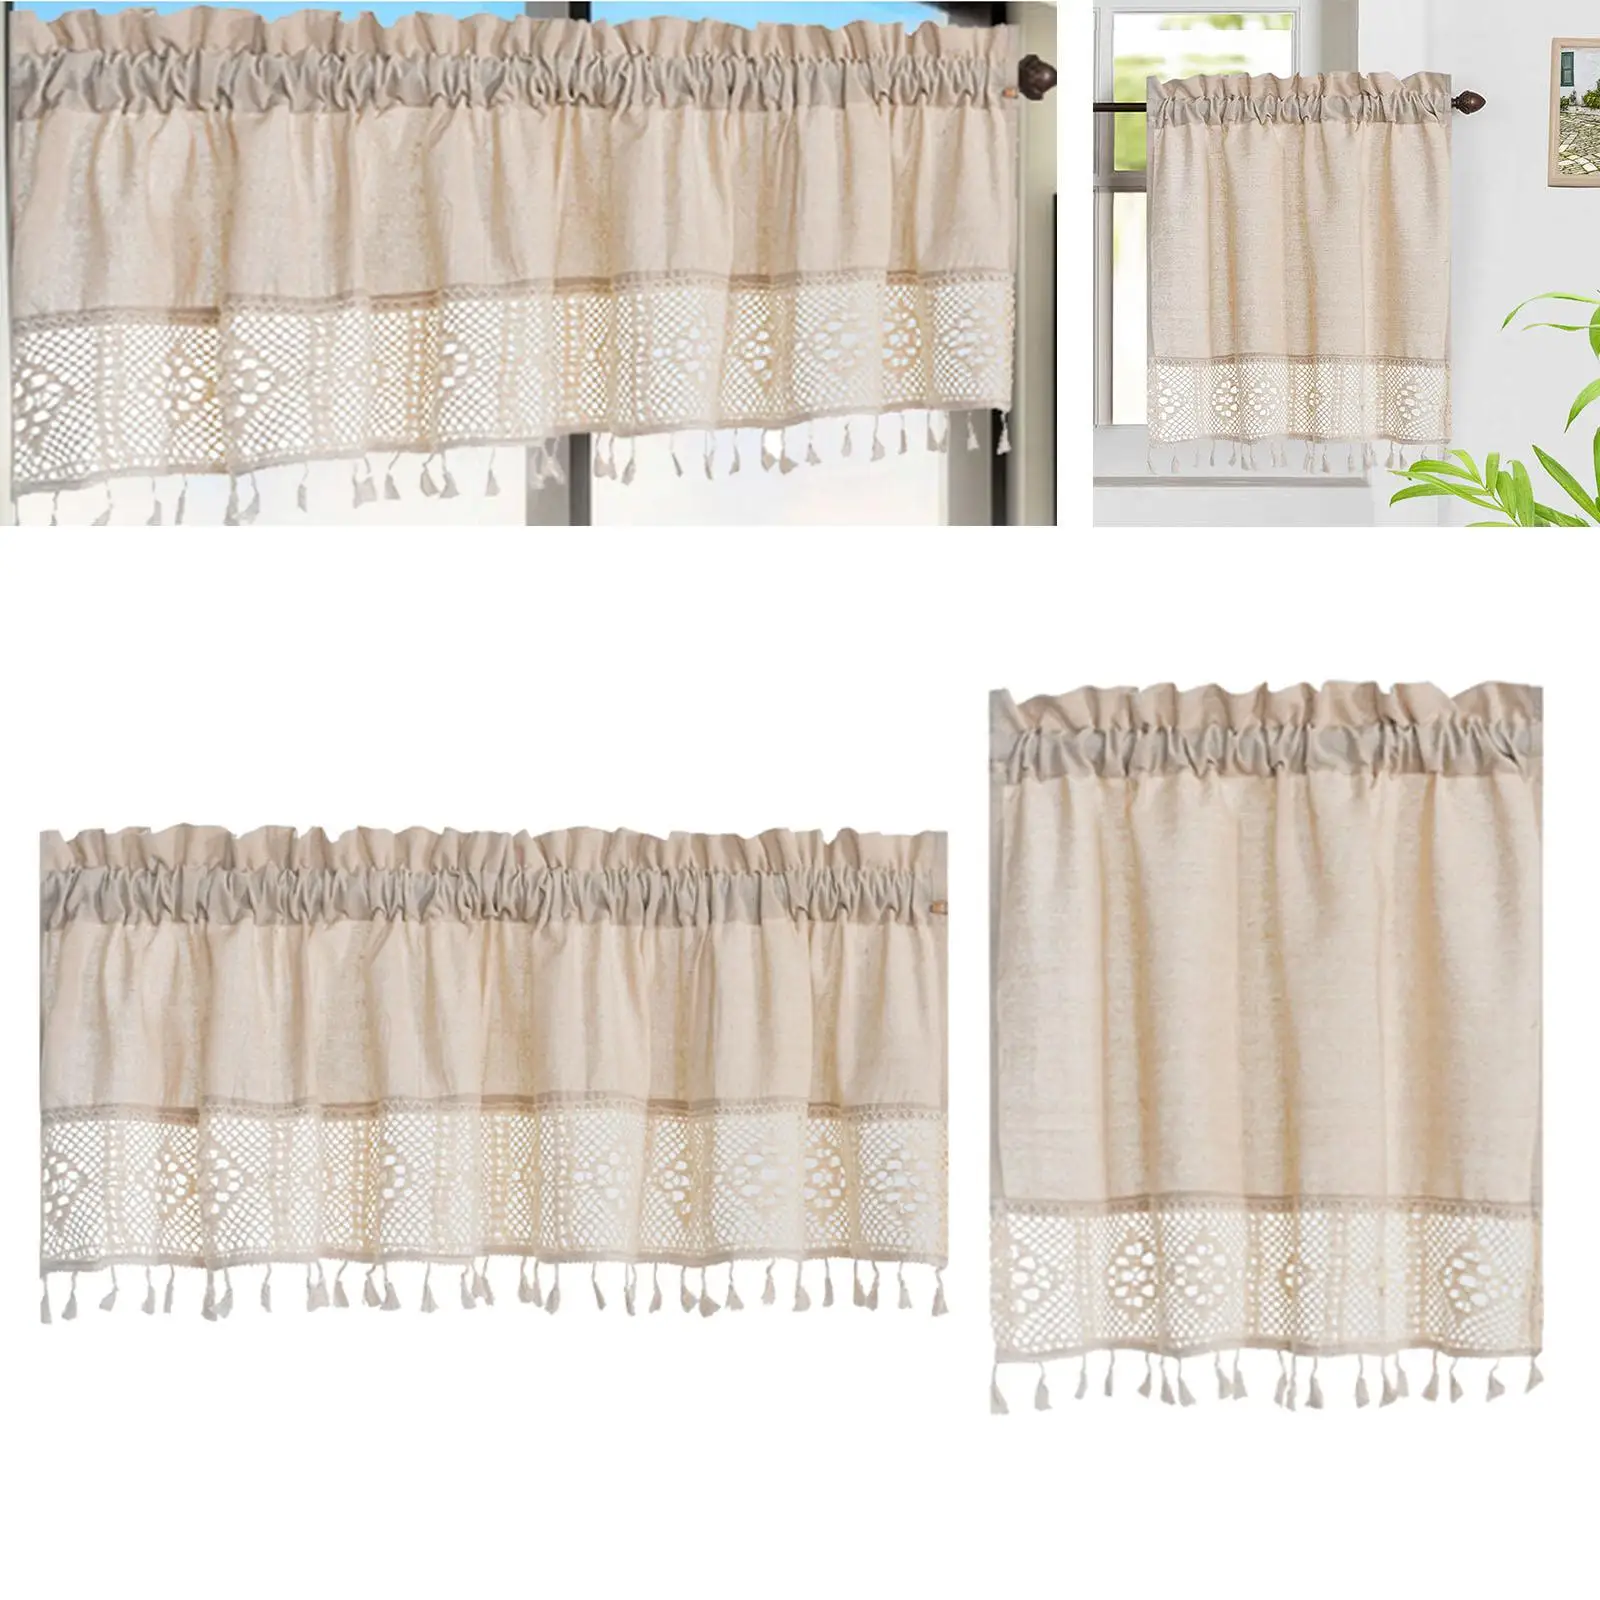 Farmhouse Valance Short Tier Drapes Breathable Window Screen Windows Short Curtain for Home Kitchen Cafe Living Room Decoration